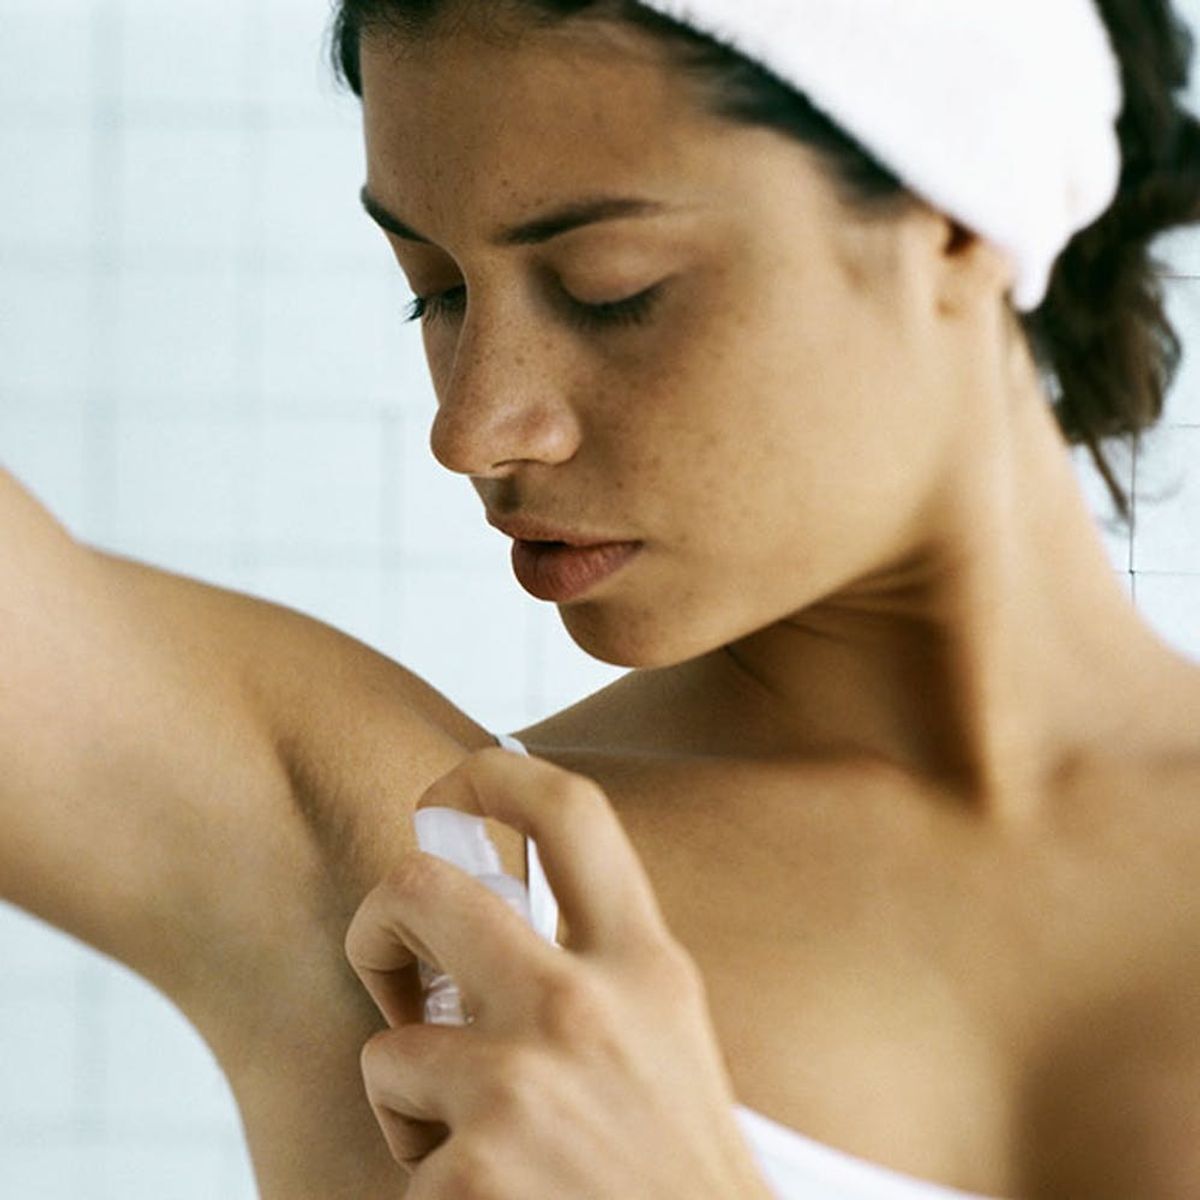 Are Aluminum-Based Antiperspirants Actually Bad for You?